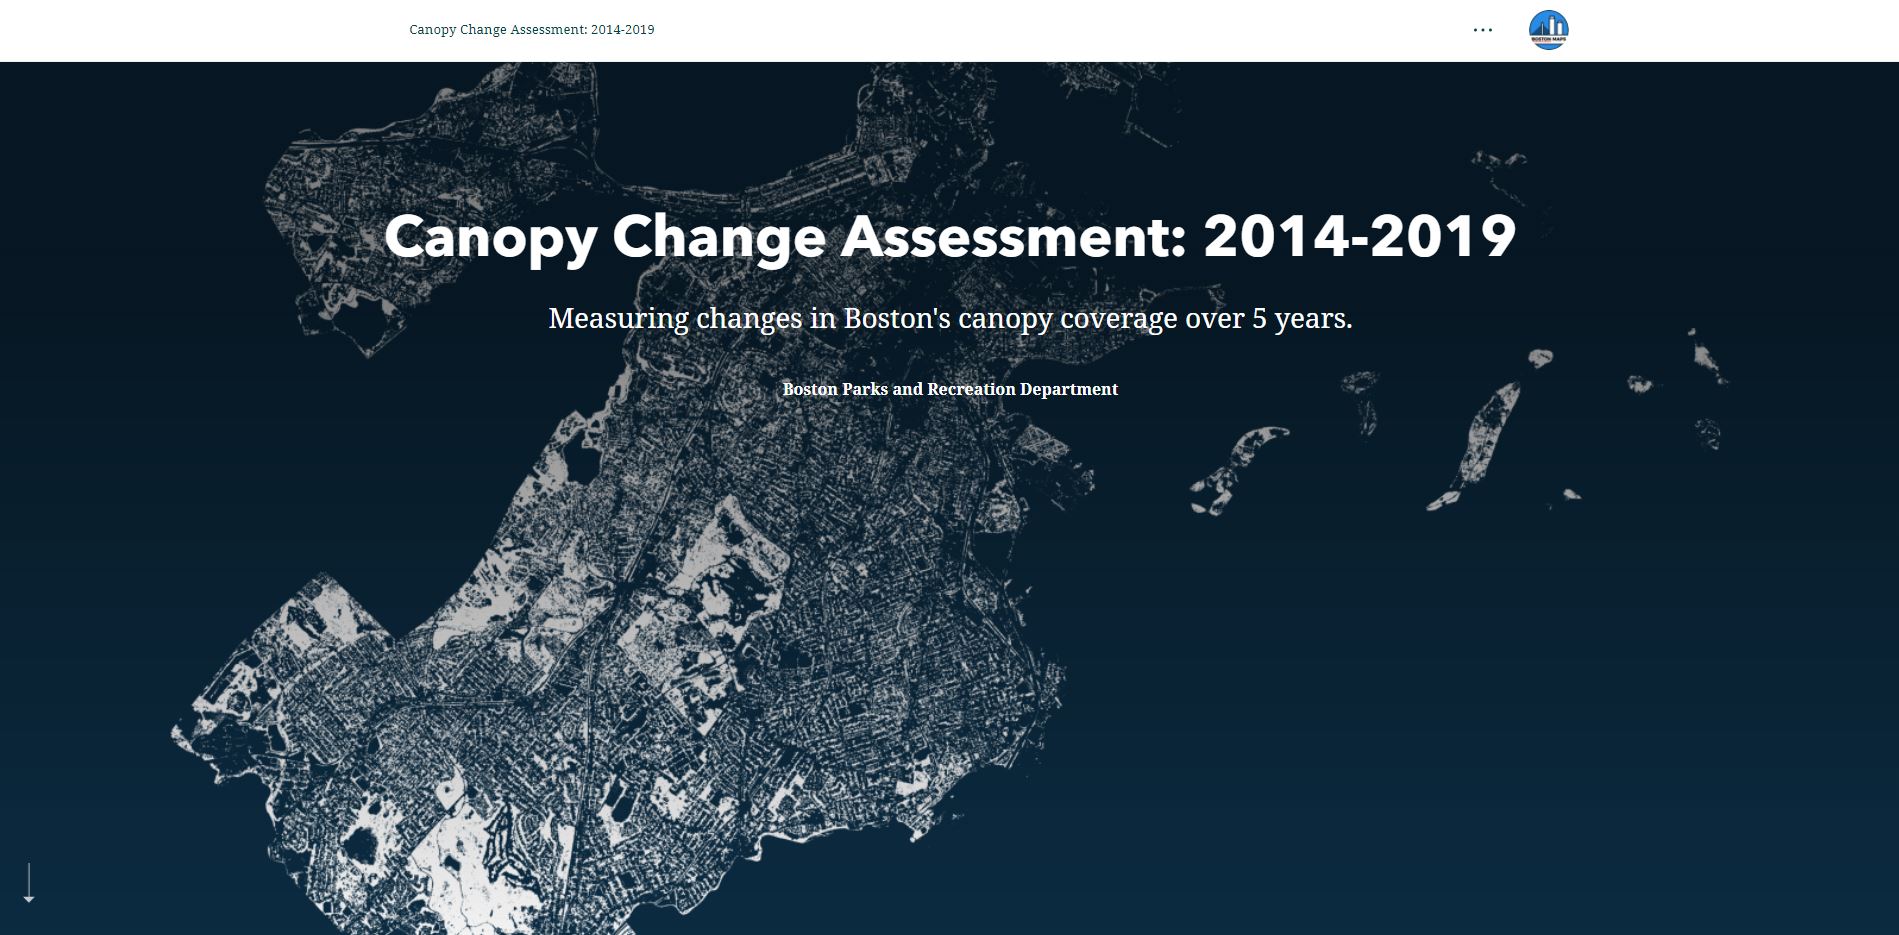 canopy-change-assessment-2014-2019